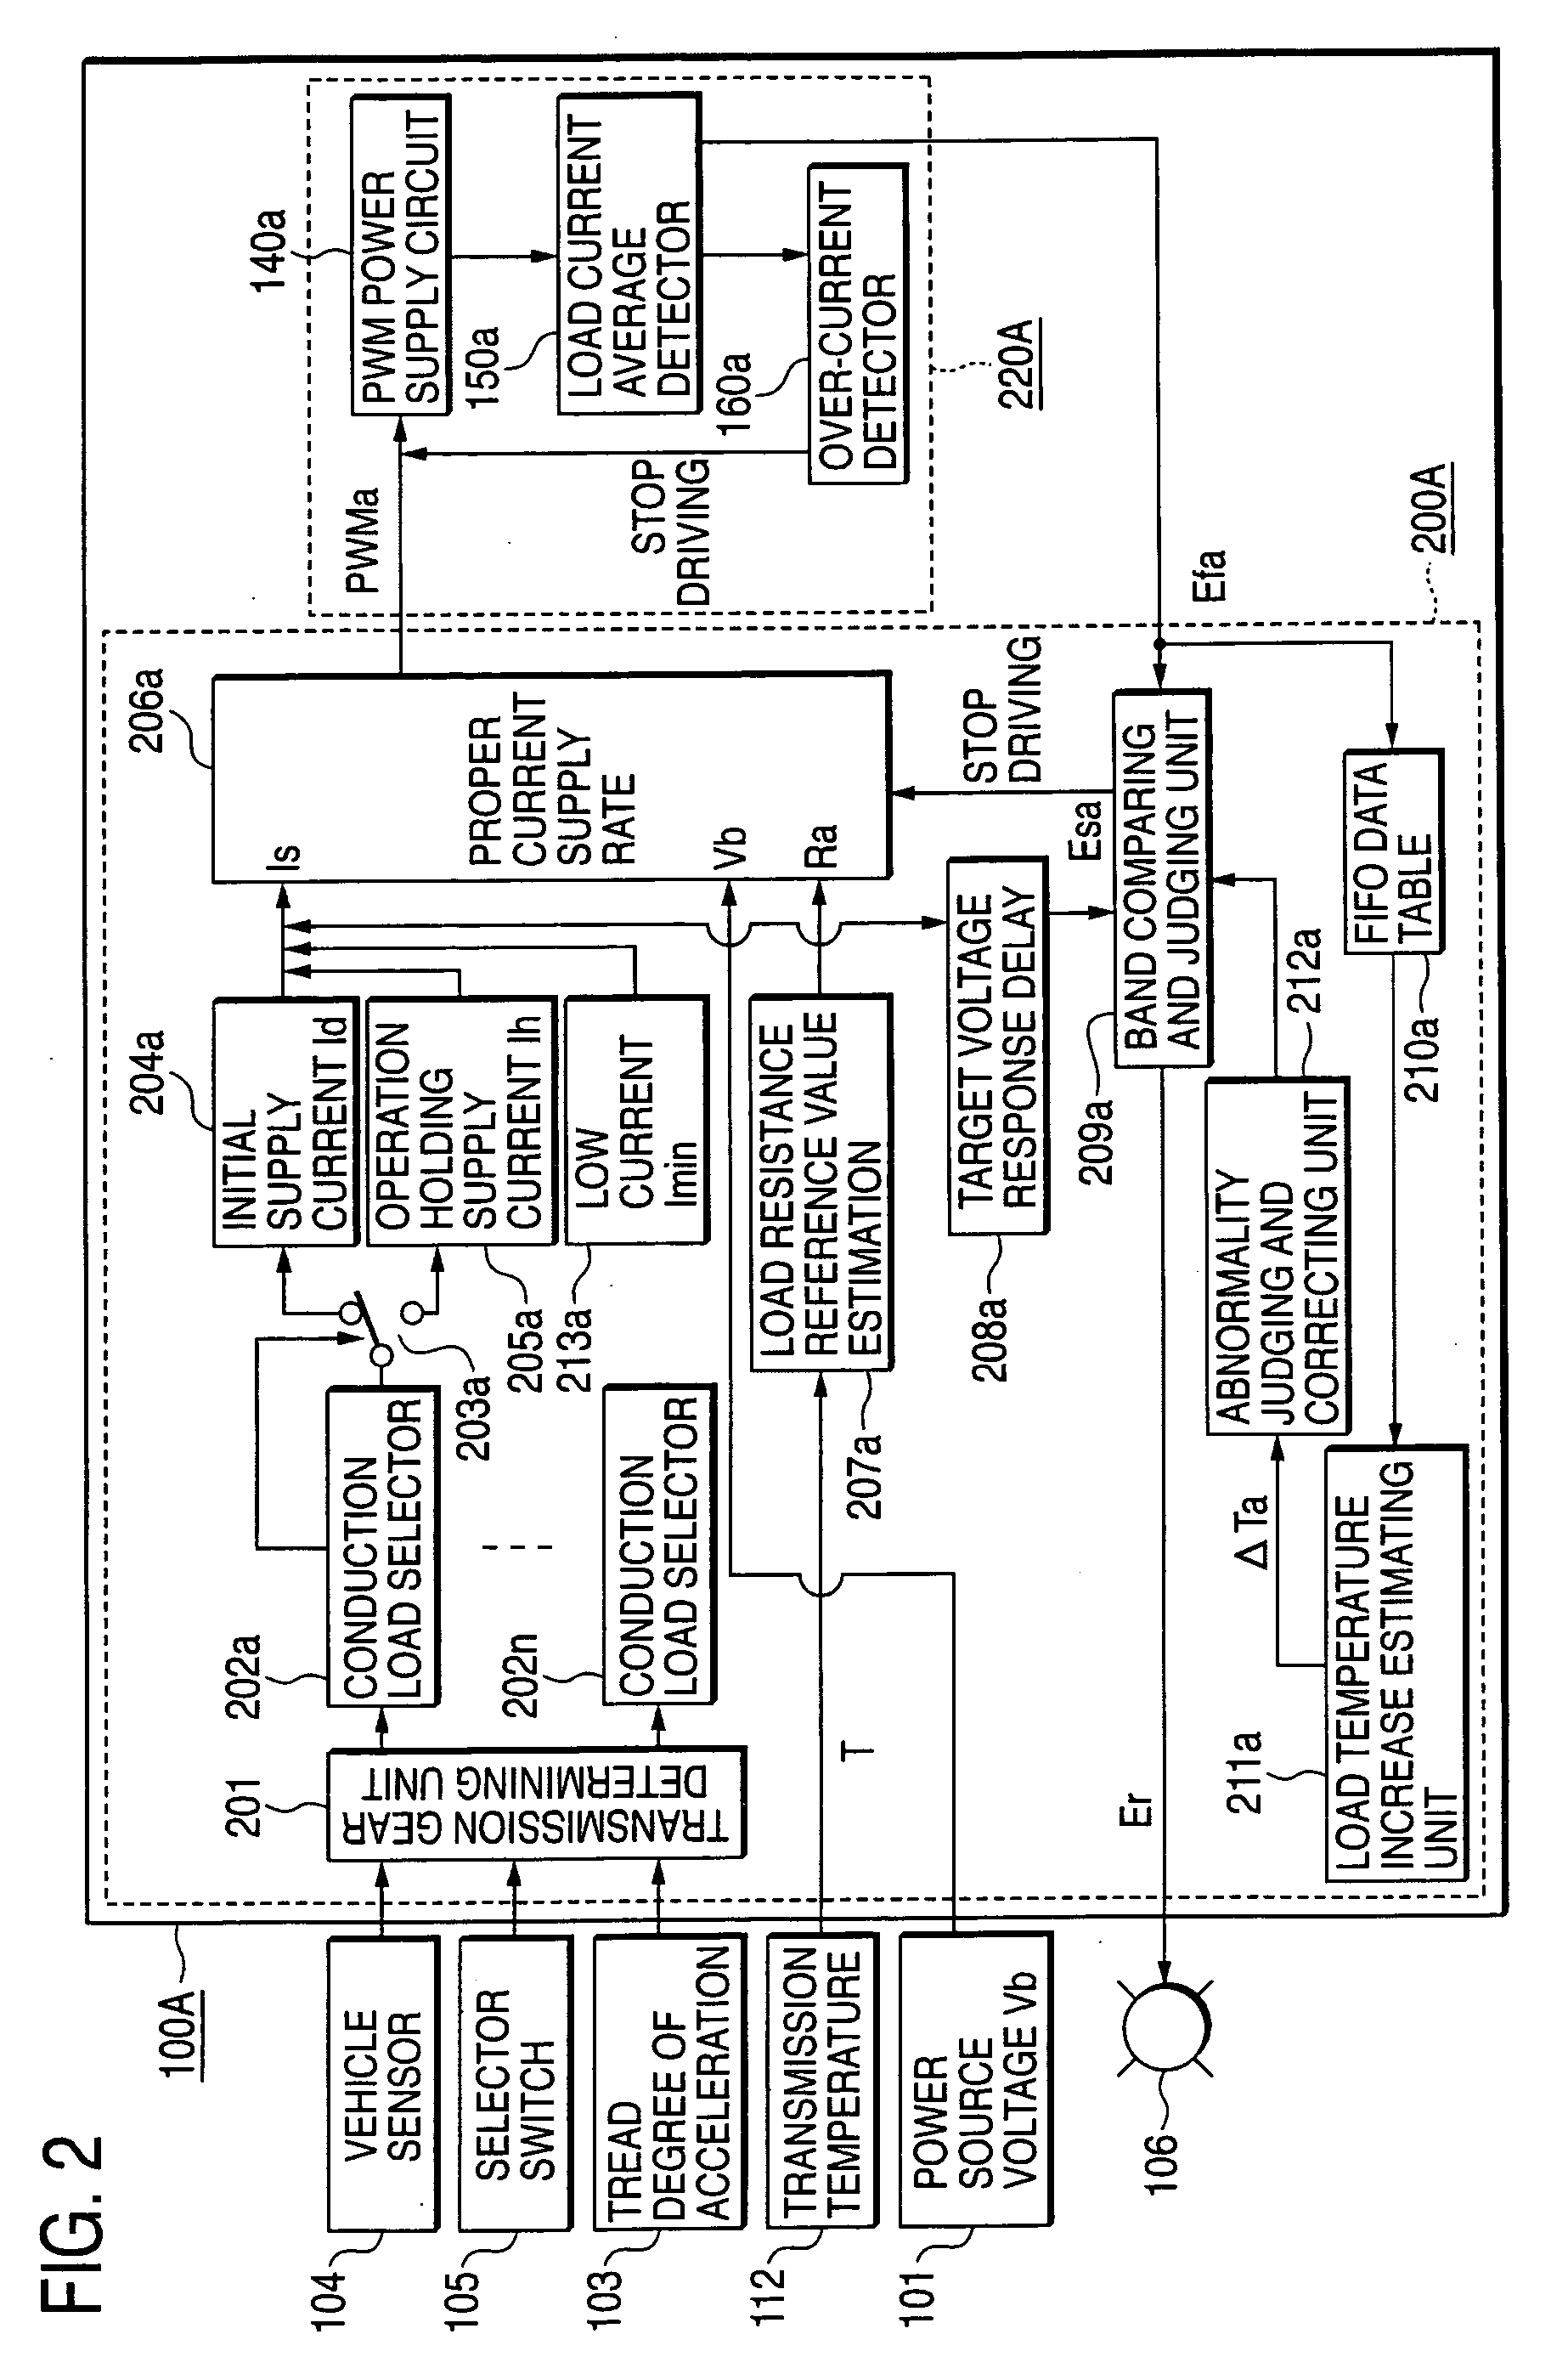 Non-feedback type load current controller